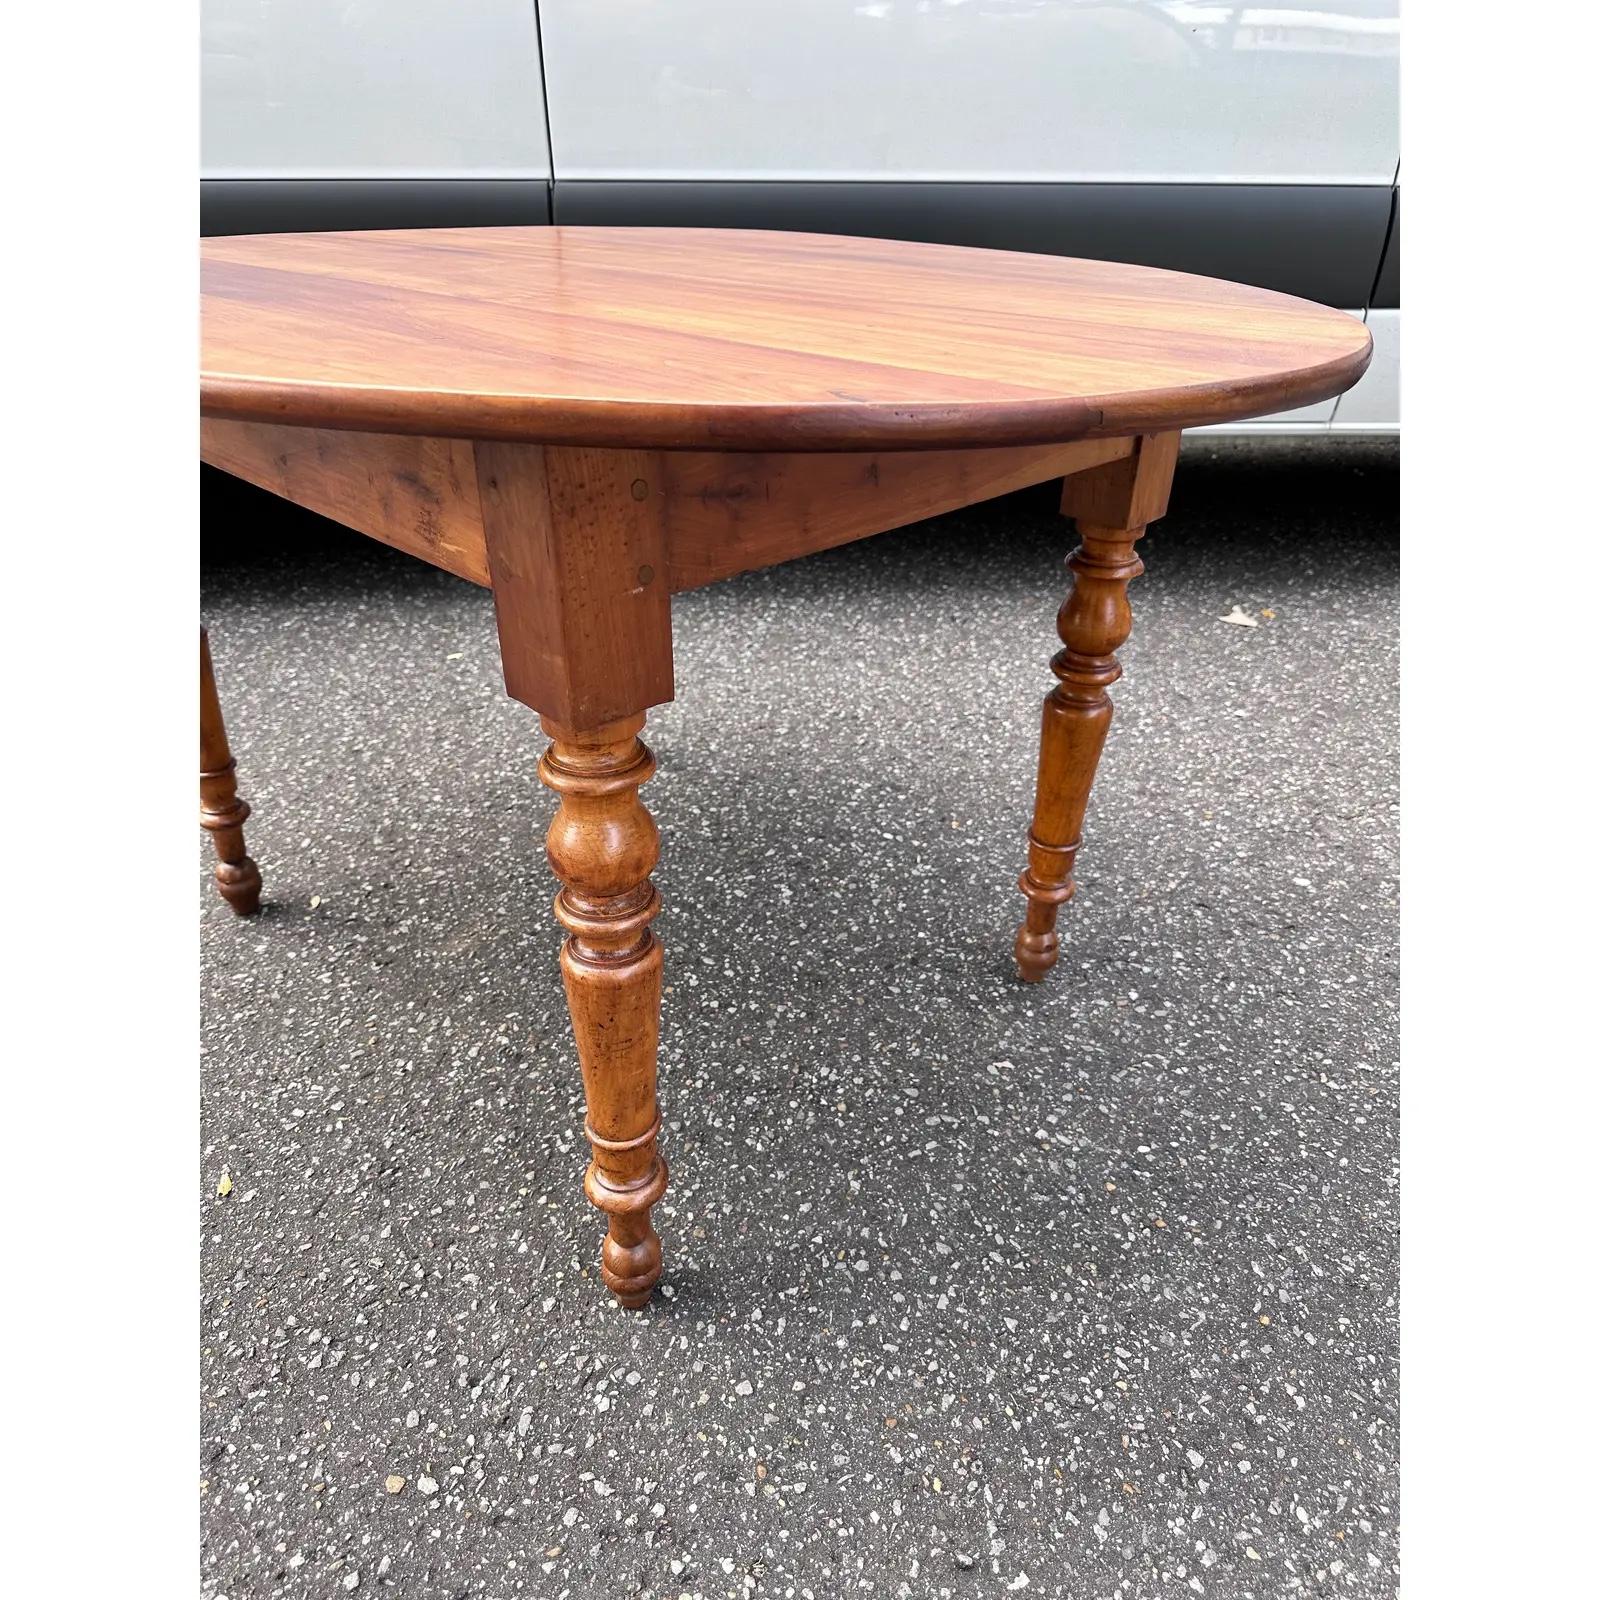 This is a lovely little French table! The wood is a warm vibrant honey hue with just a hint of red. The piece boasts beauty in simplicity with a smooth top that lets the natural beauty of the wood speak for itself. The legs feature some simple